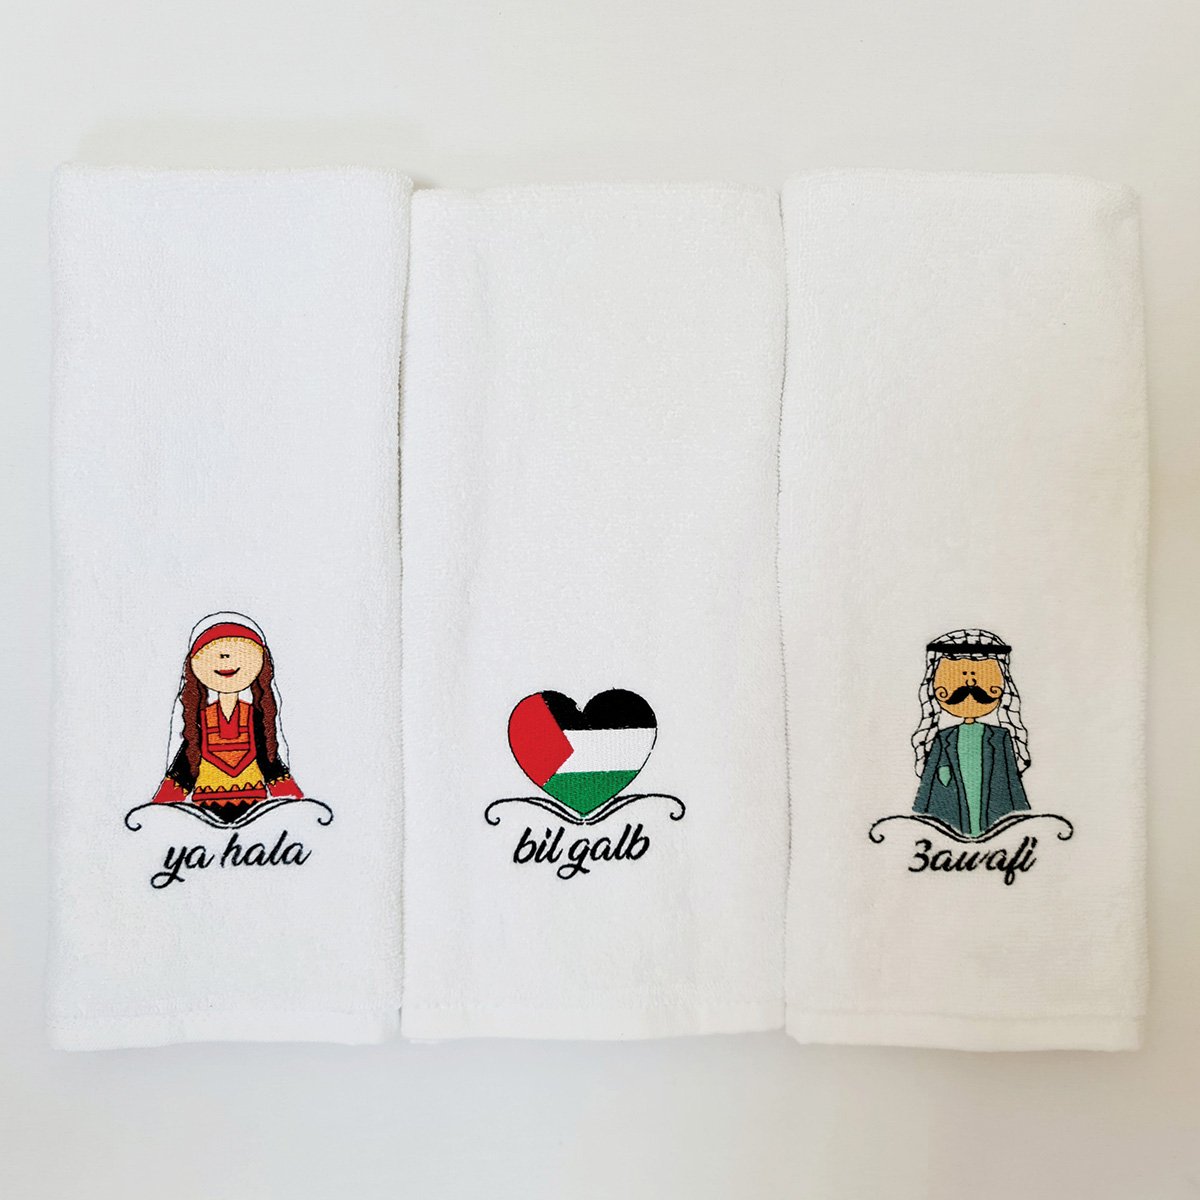 Embroidered set of 3 Palestinian towels to decorate your guest bathroom or to offer as a souvenir. High quality 40x70 cm cotton towels.